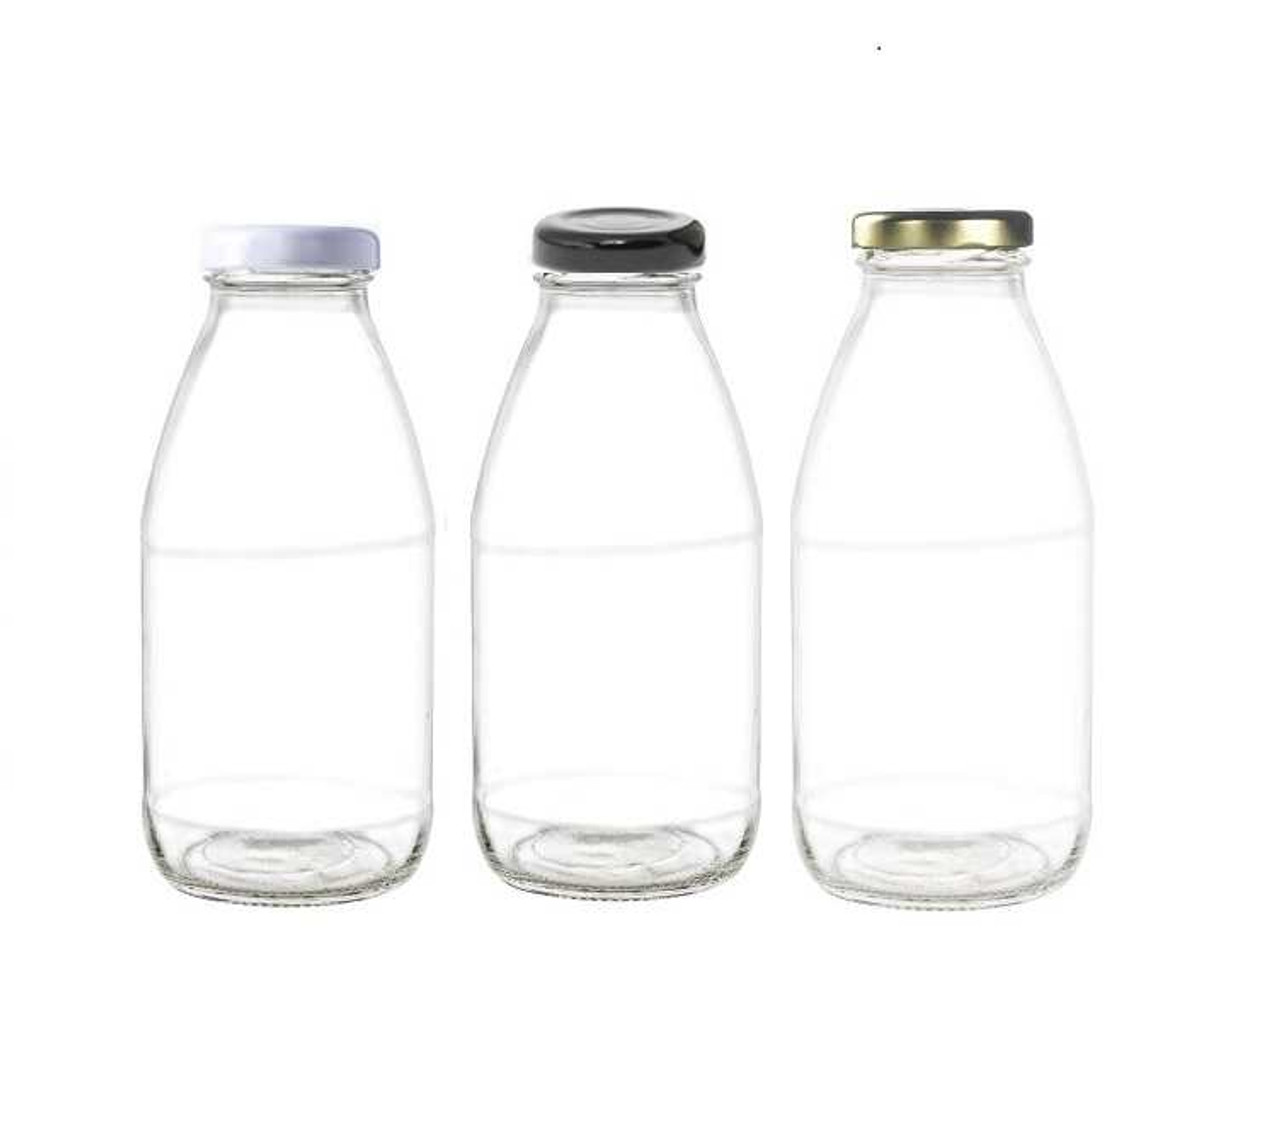 https://cdn11.bigcommerce.com/s-1ybtx/images/stencil/1280x1280/products/841/6031/10-oz-Retro-Glass-Bottle-with-38TW-Plastisol-Lined-Lid_2601__26592.1699988399.jpg?c=2?imbypass=on